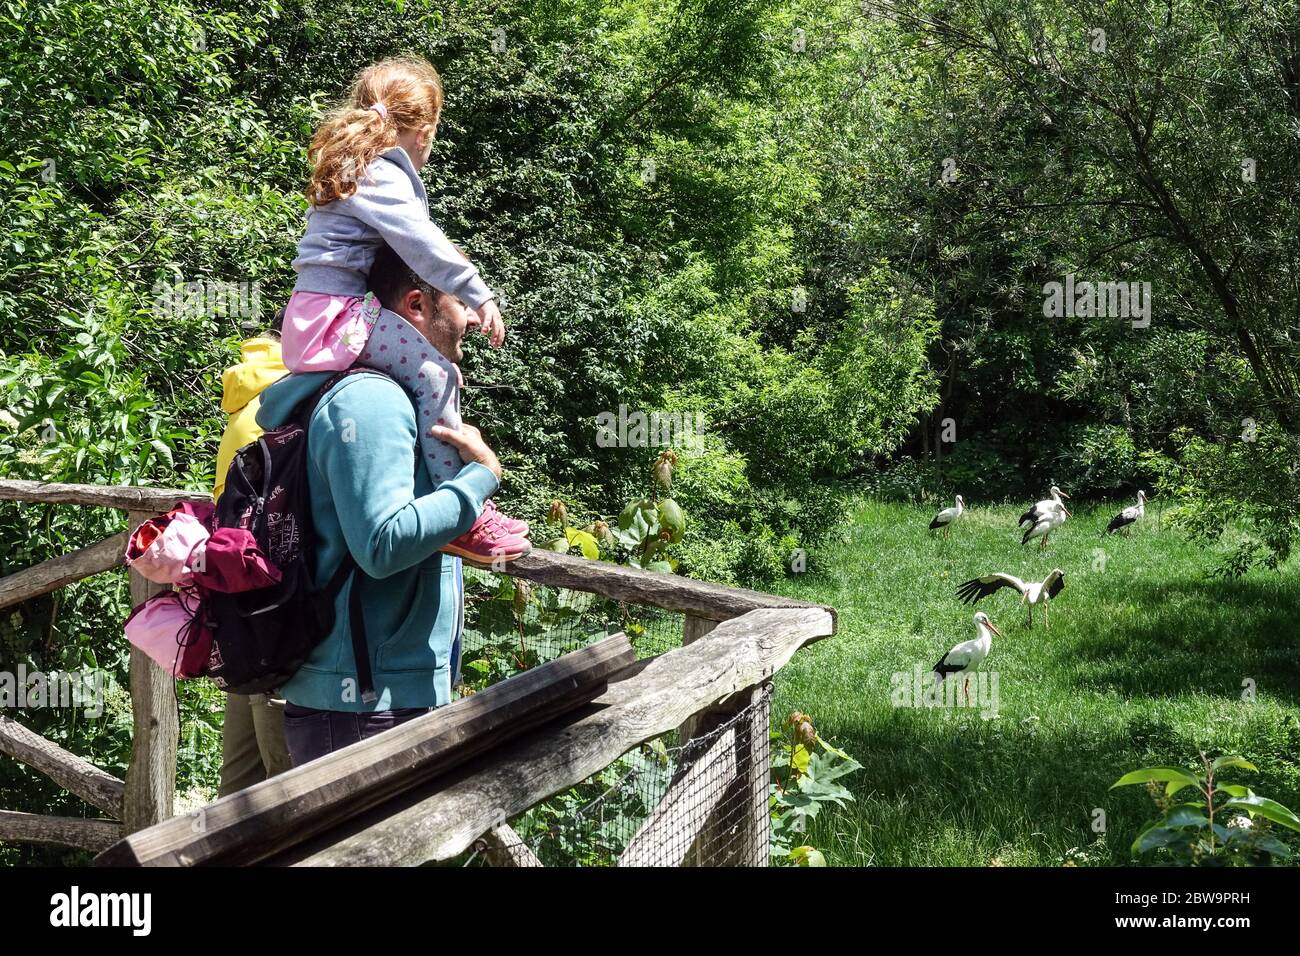 Prague Zoo family People, visitors, watch the birds, good event for a day trip for family with children Prague daily life zoo animals people Stock Photo